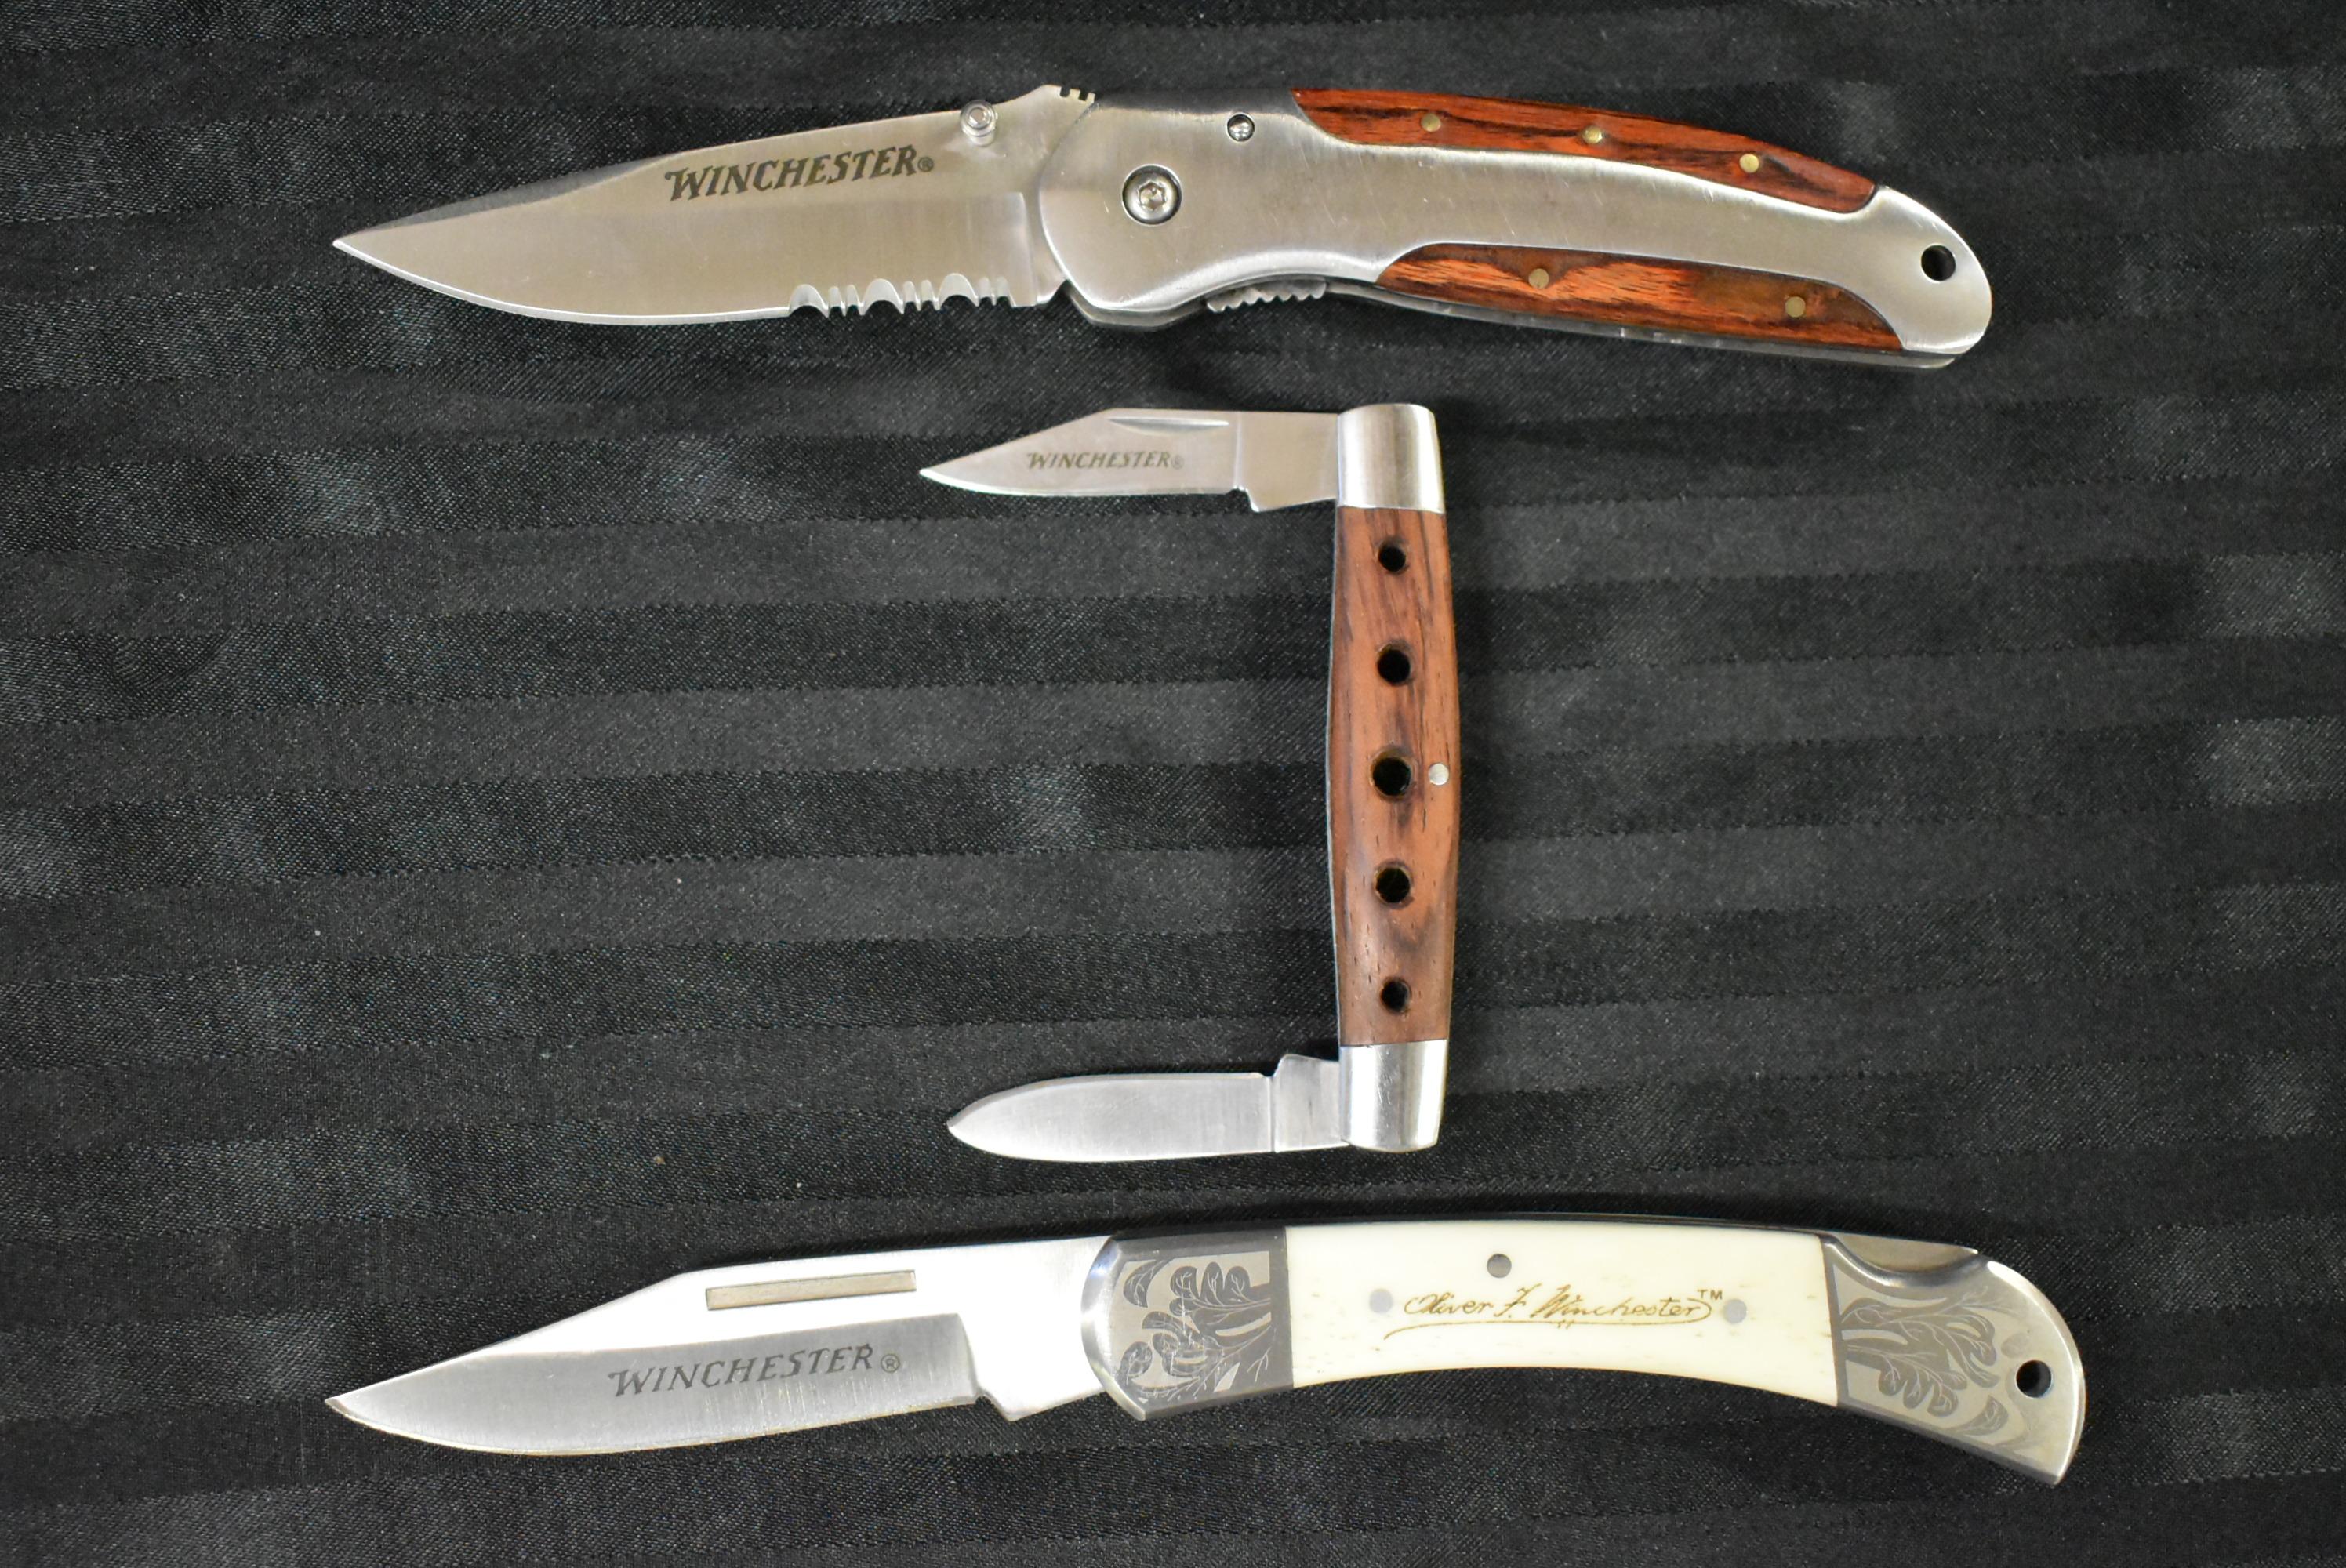 WINCHESTER KNIVES!